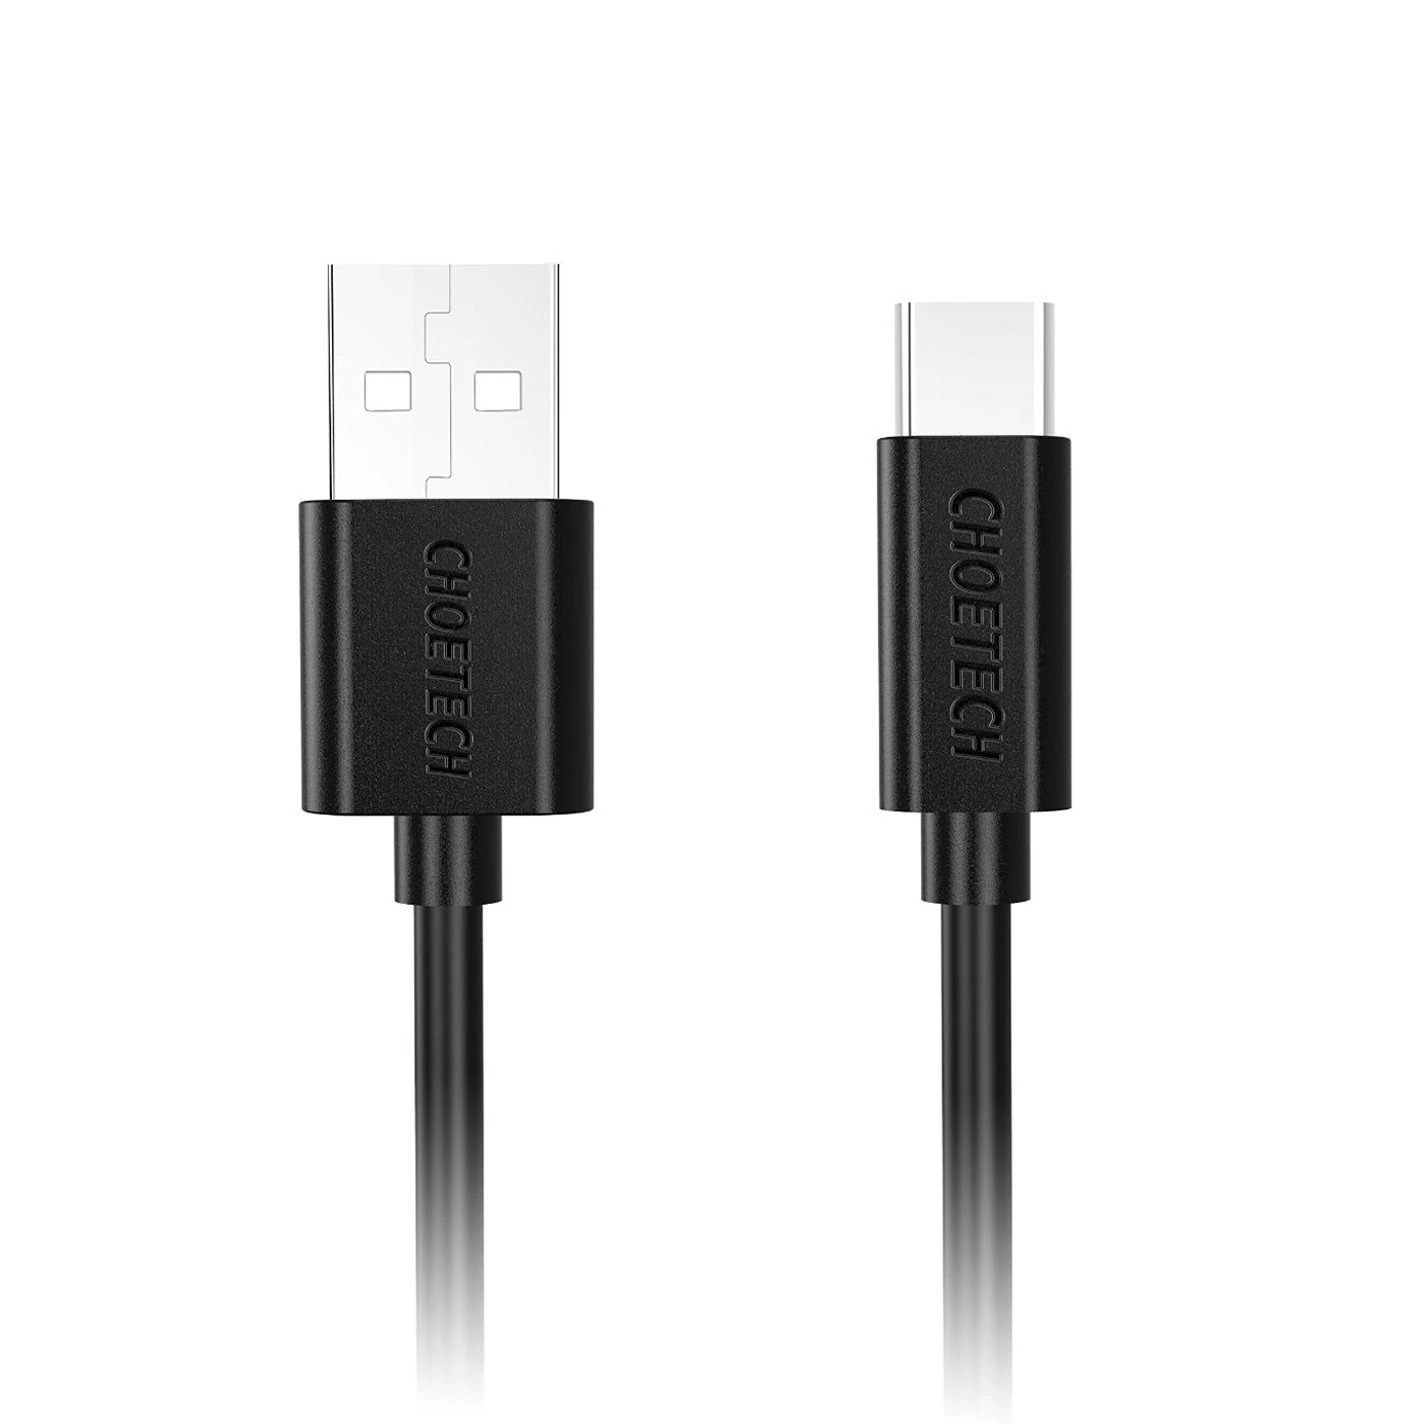 AC0001 USB-A to USB-C Charge & Sync Cable Black – 3M